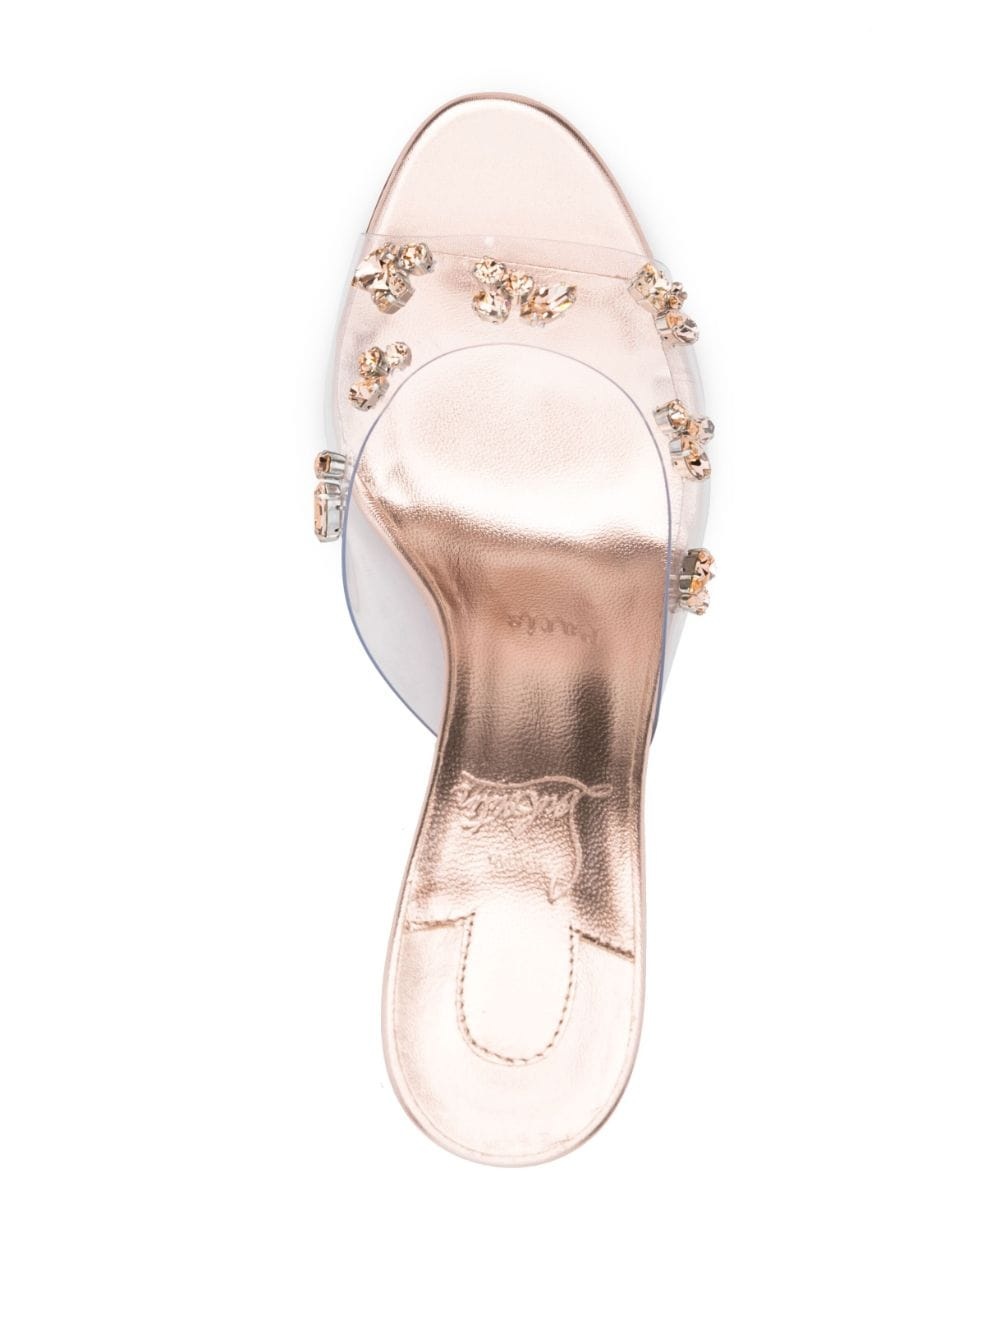 Degraqueen 85mm embellished mules - 4